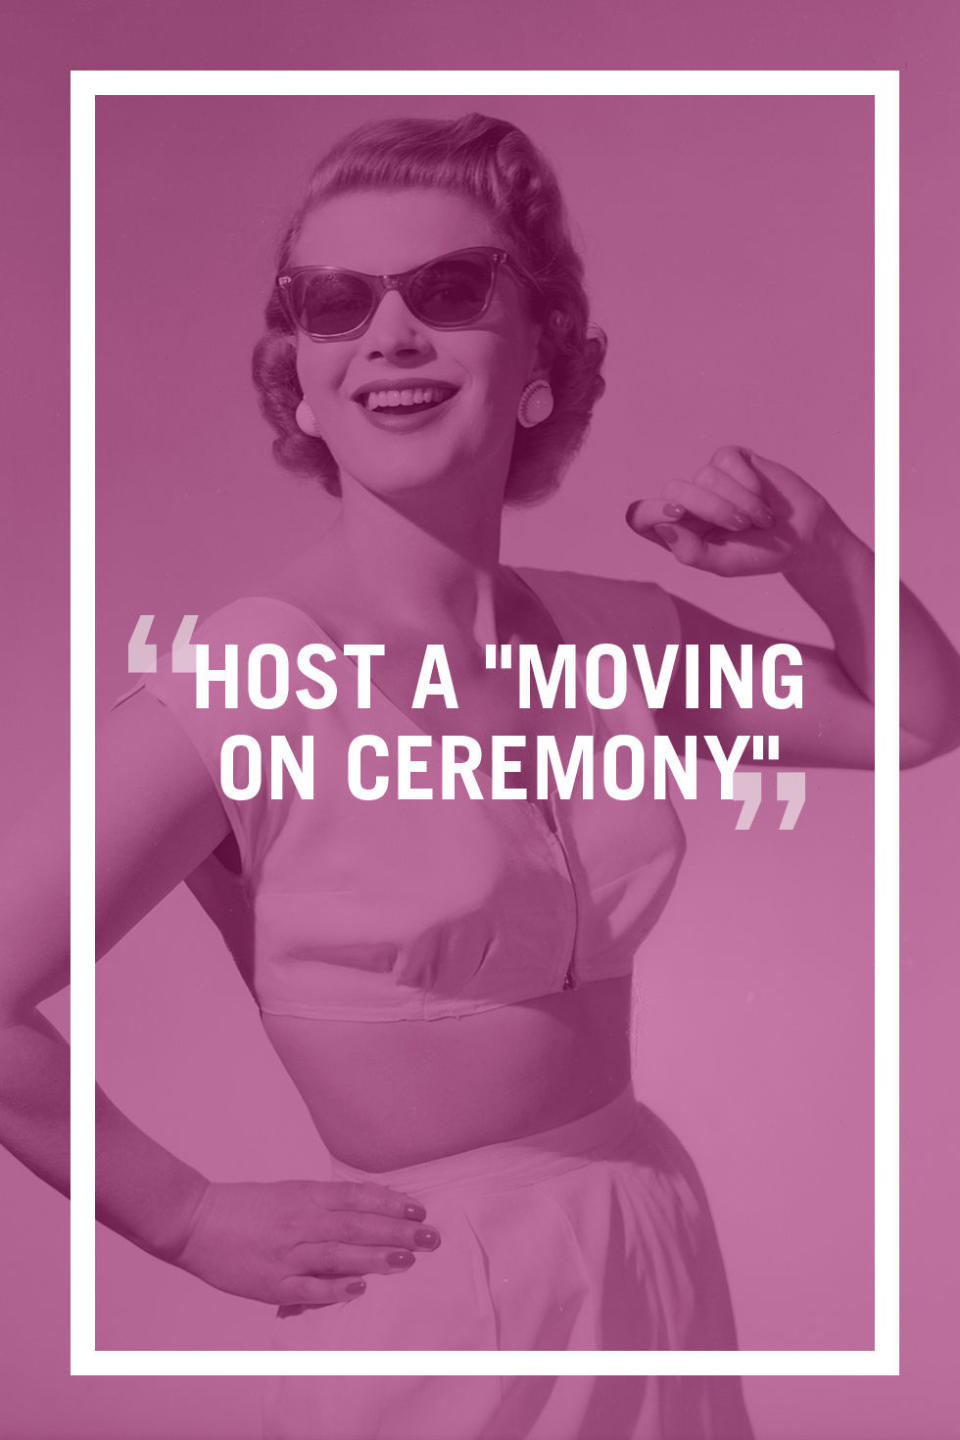 Host a "Moving On Ceremony"